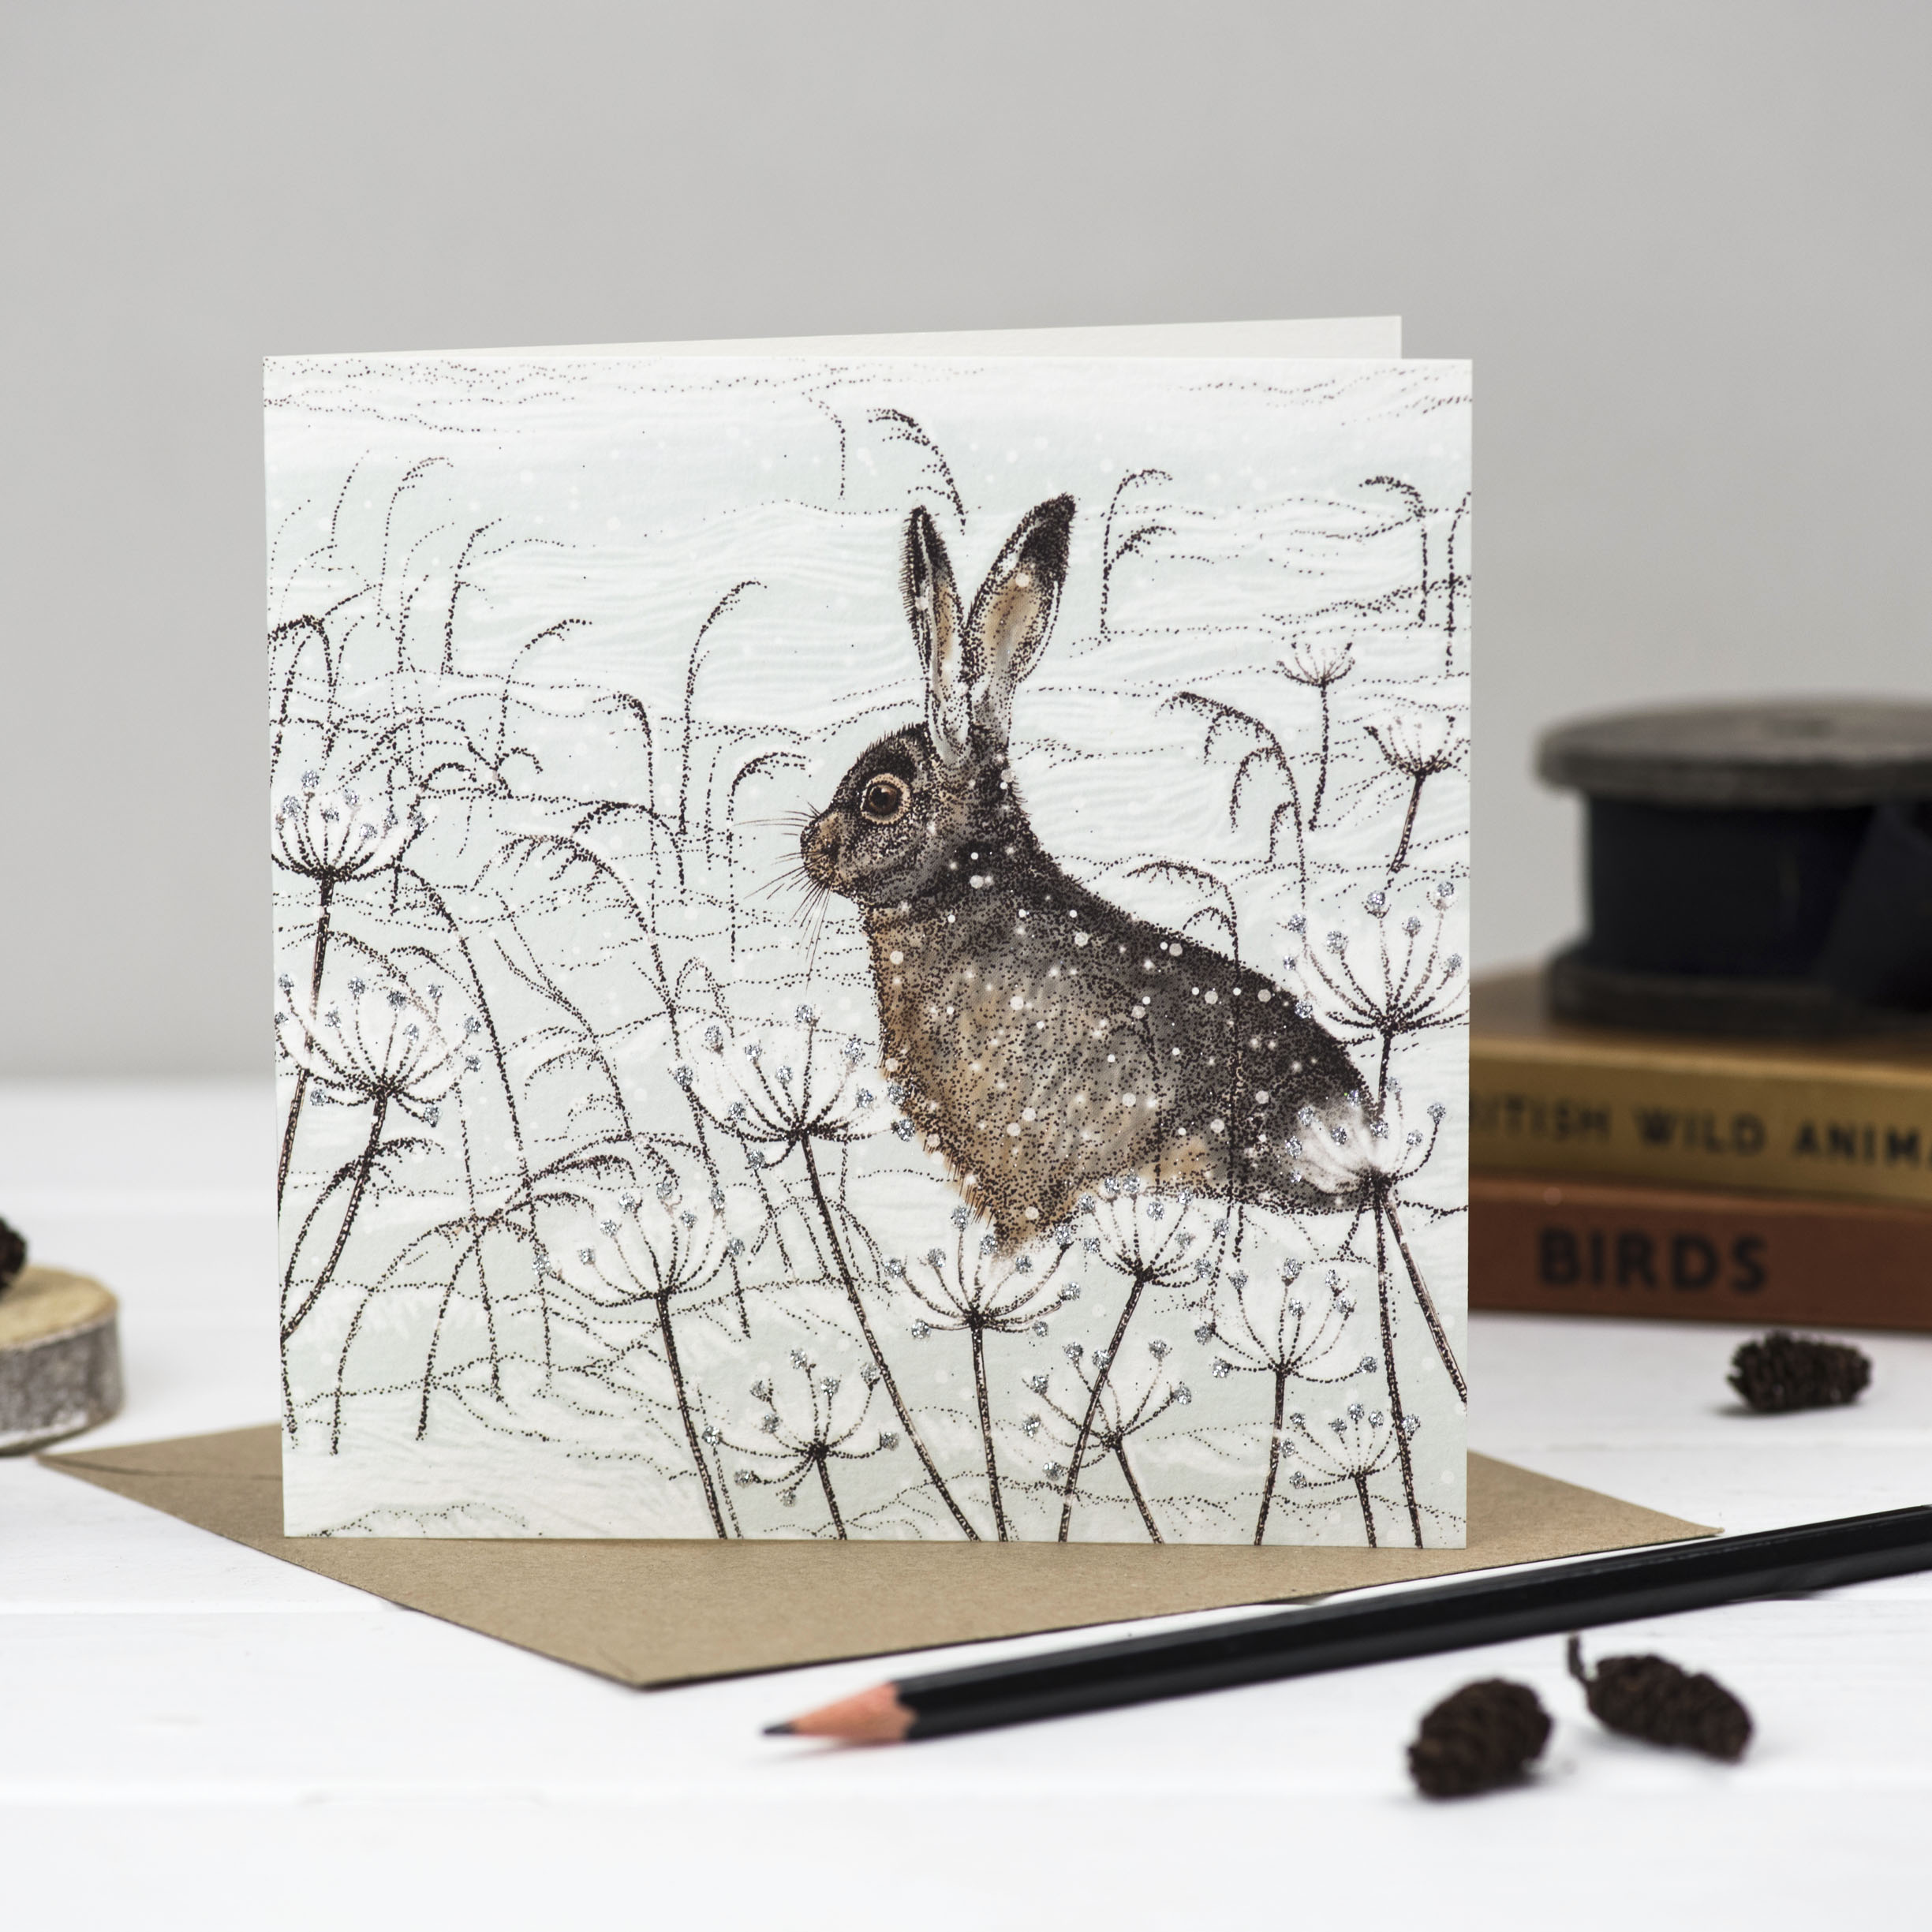 Above: The ‘Hare’ illustration from Fay’s Studio’s In The Wild collection.